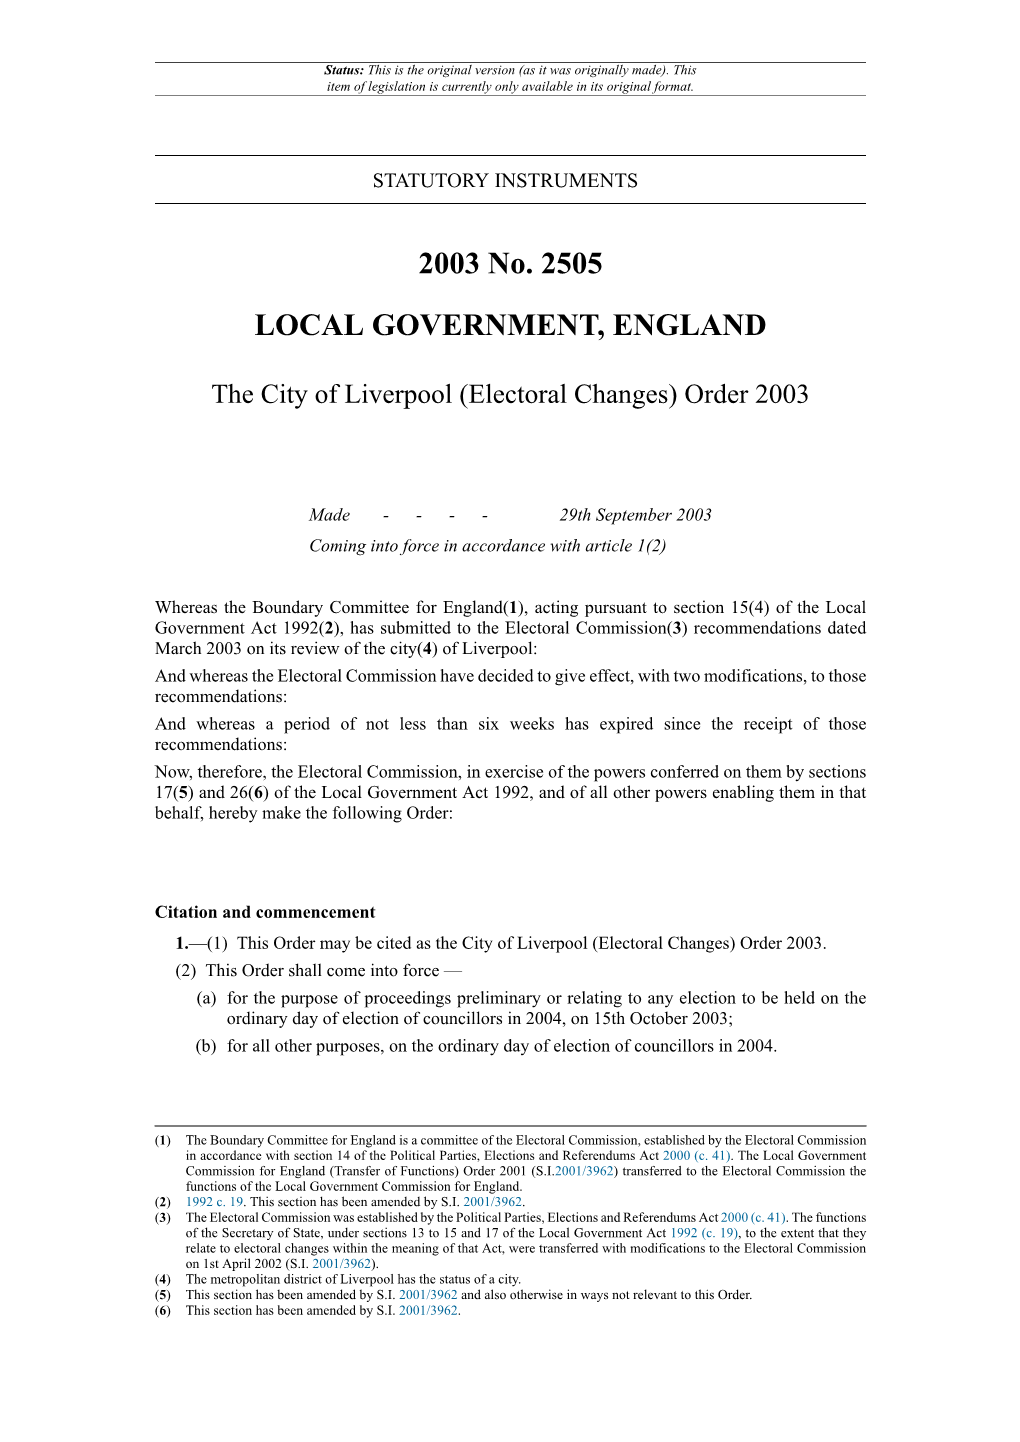 The City of Liverpool (Electoral Changes) Order 2003